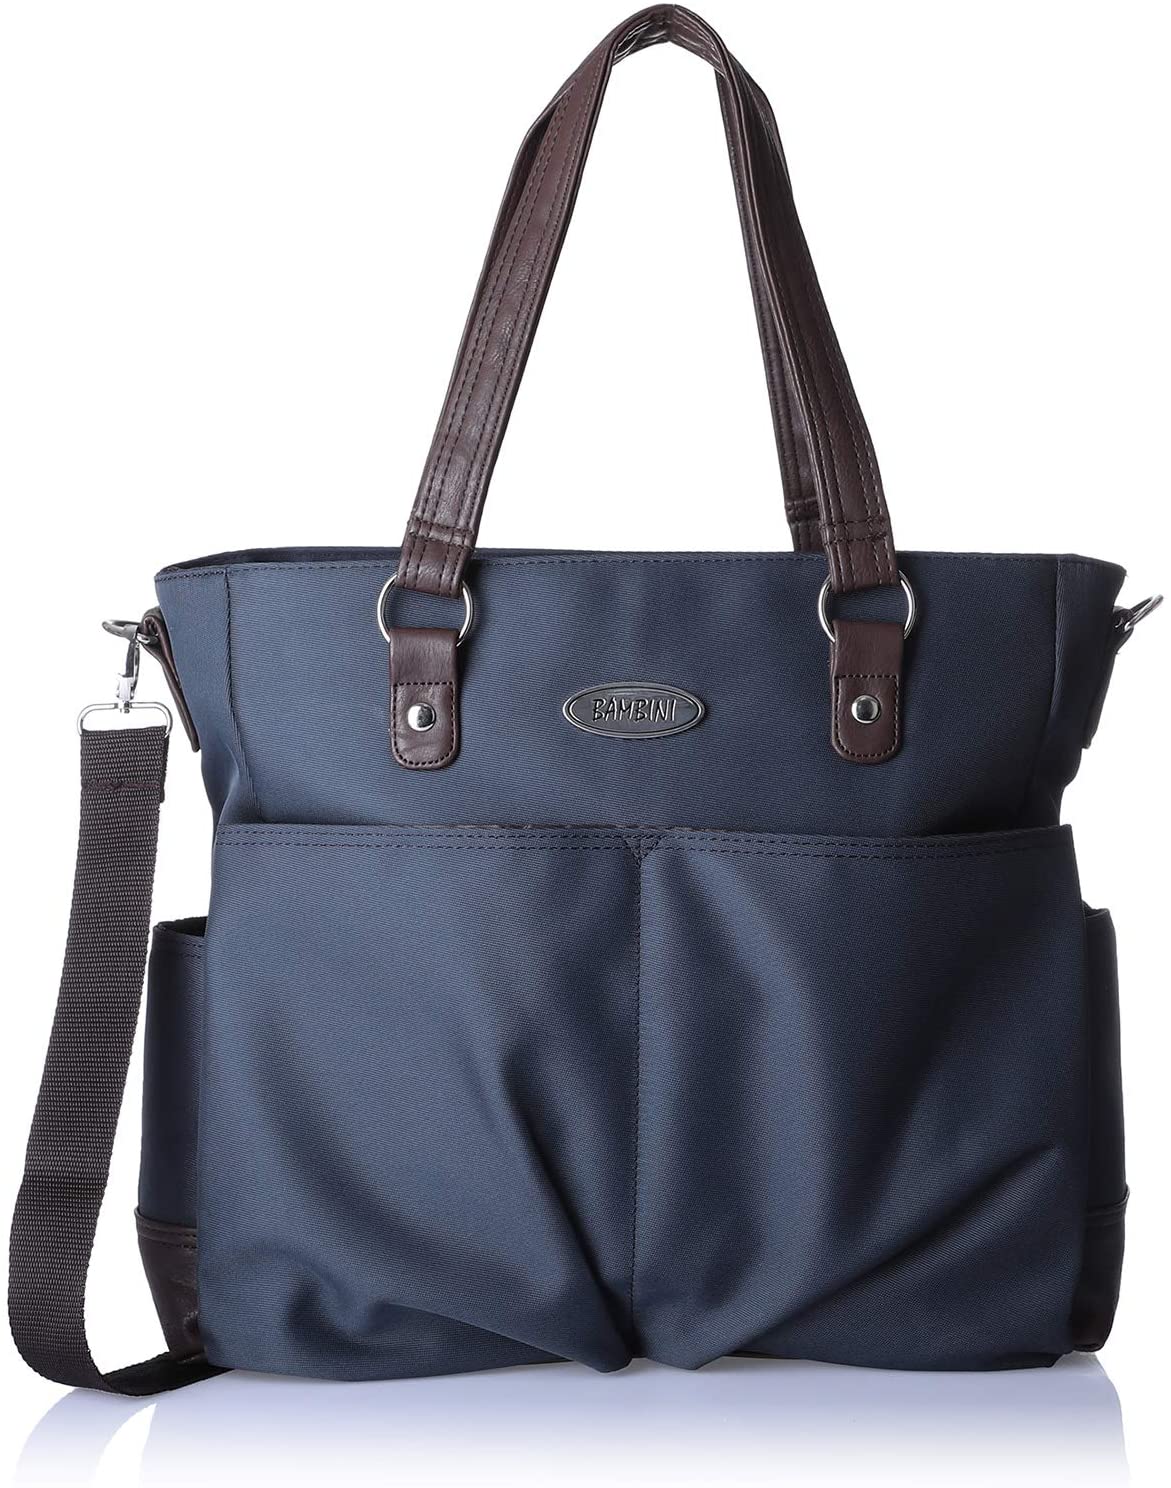 Bambini Chelsea Diaper Bag - Navy blue | The Mommy Club Shop